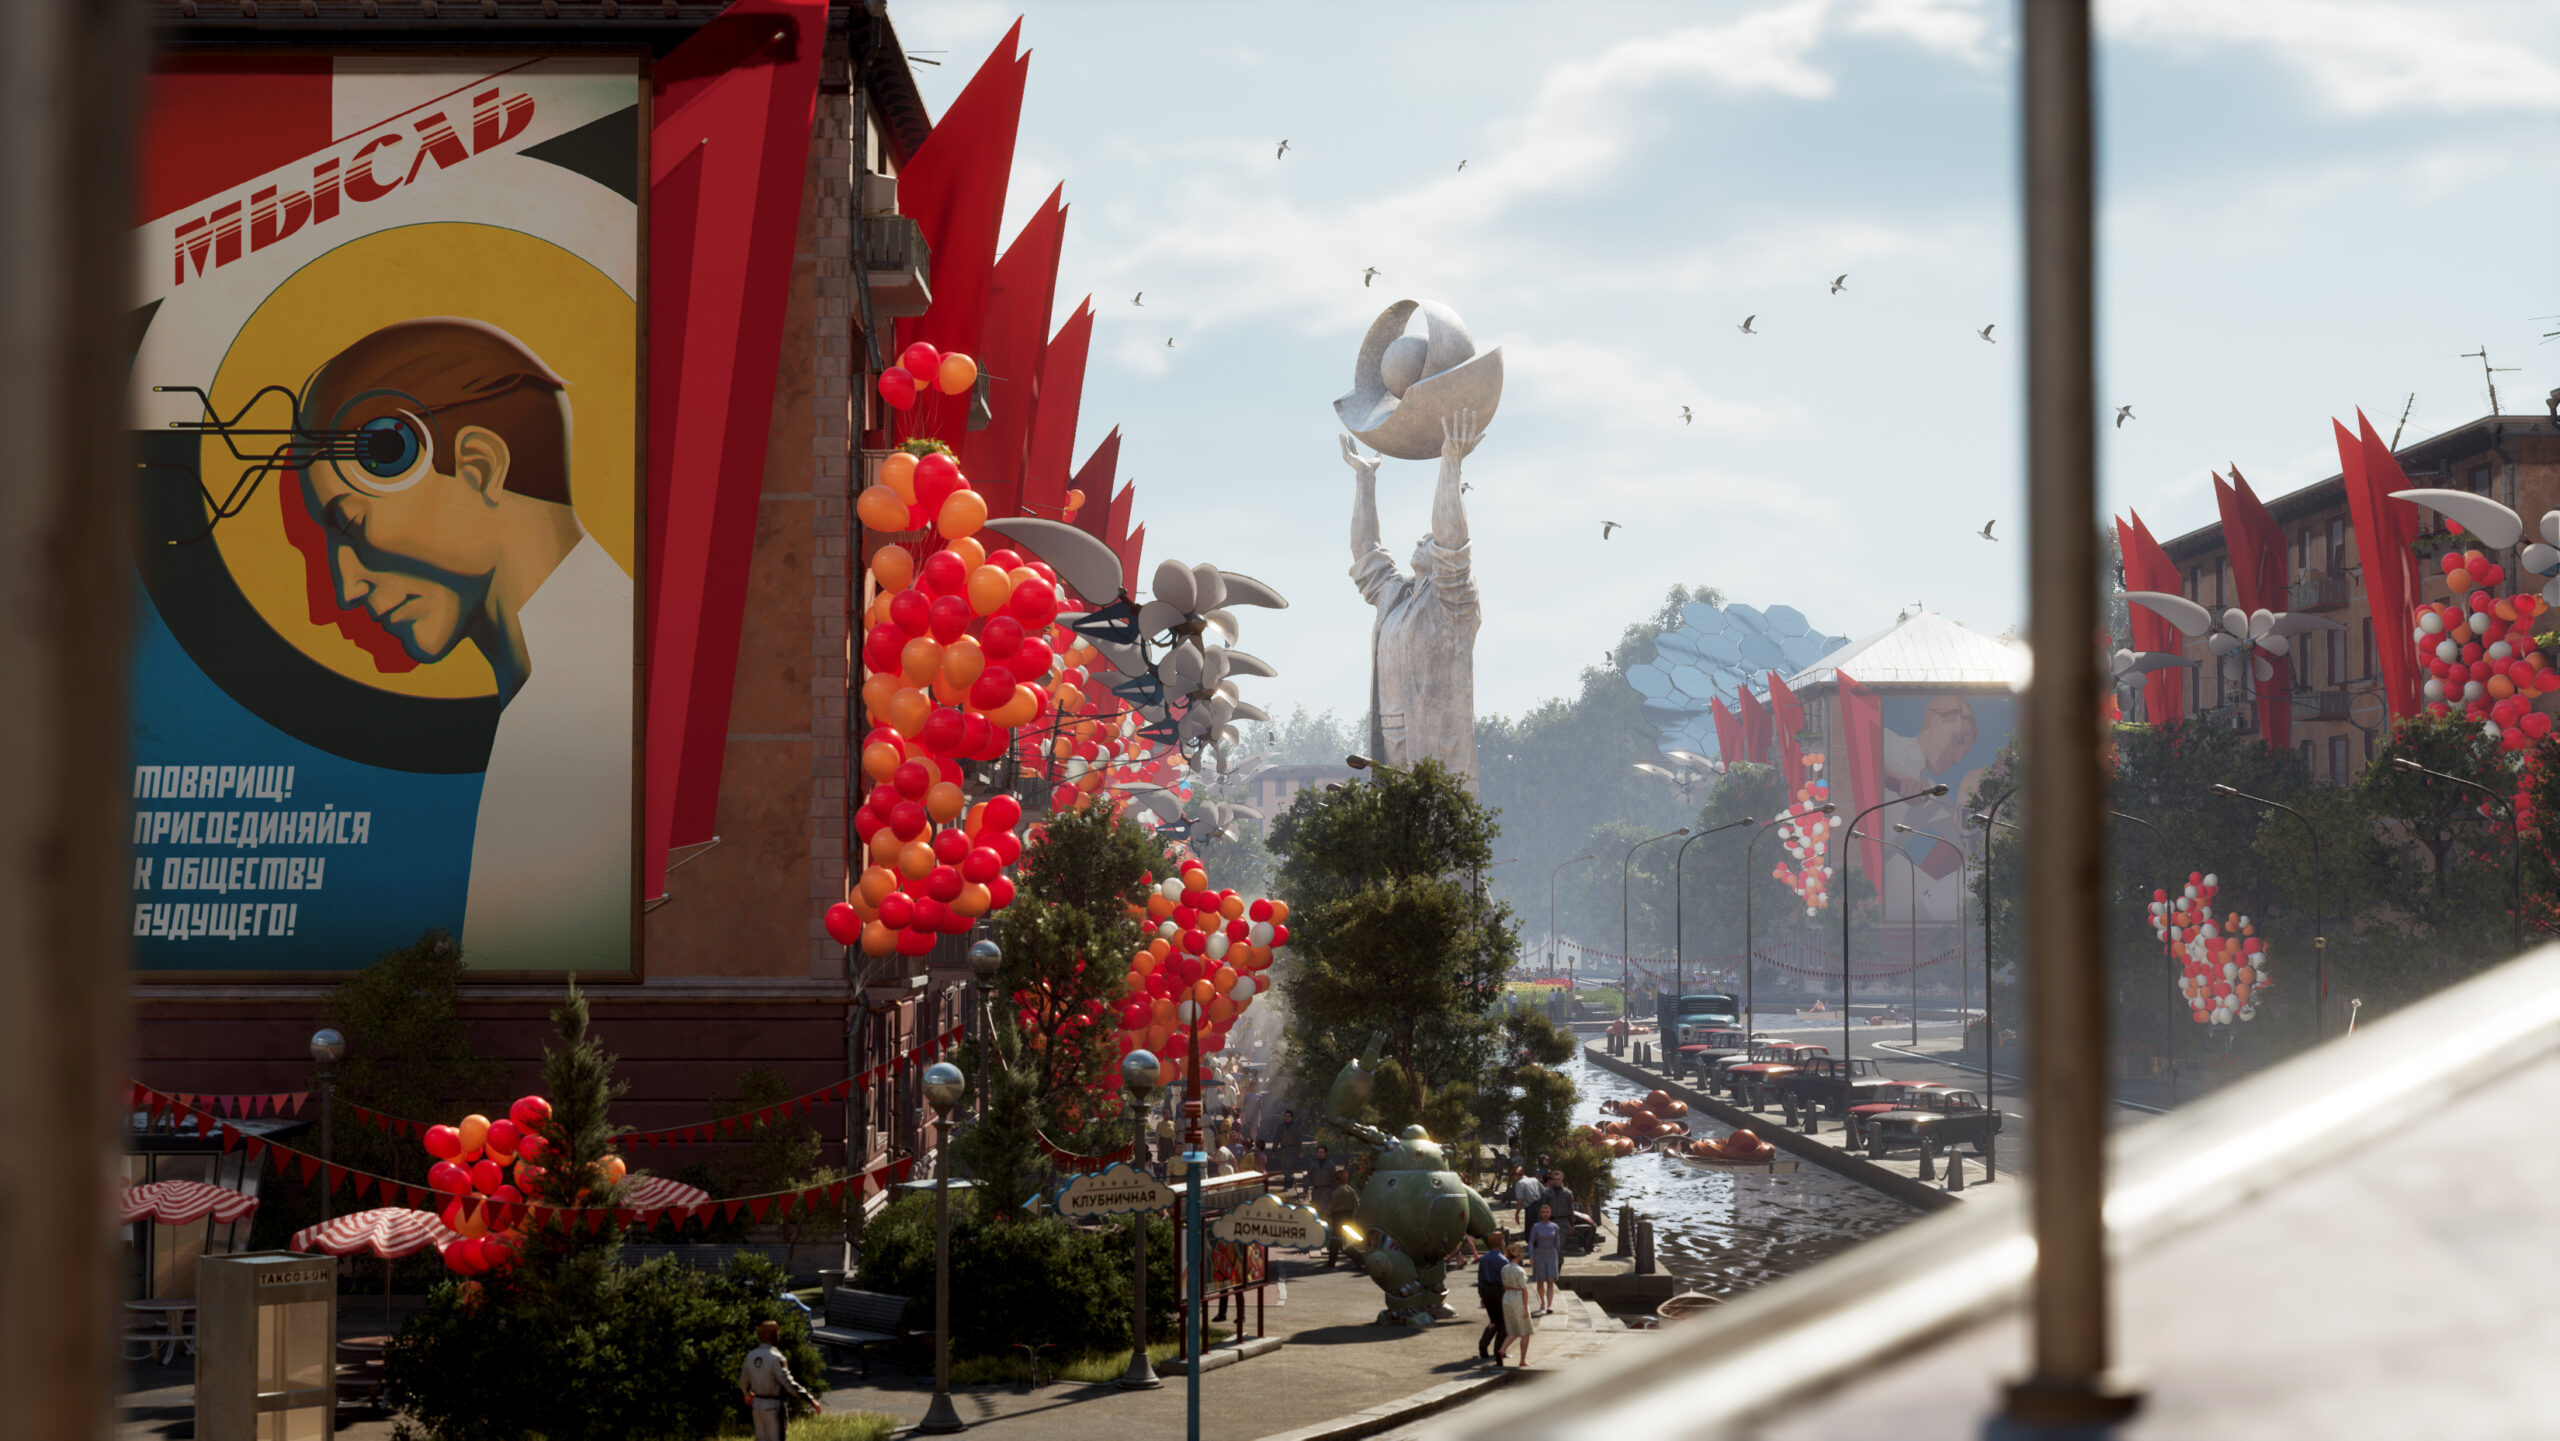 Chelomey Complex celebrates the launch of new technology, with the streets decorated with balloons.  A poster promoting the new THOUGHT device and a statue can also be seen via Atomic Heart (2023), Focus Entertainment